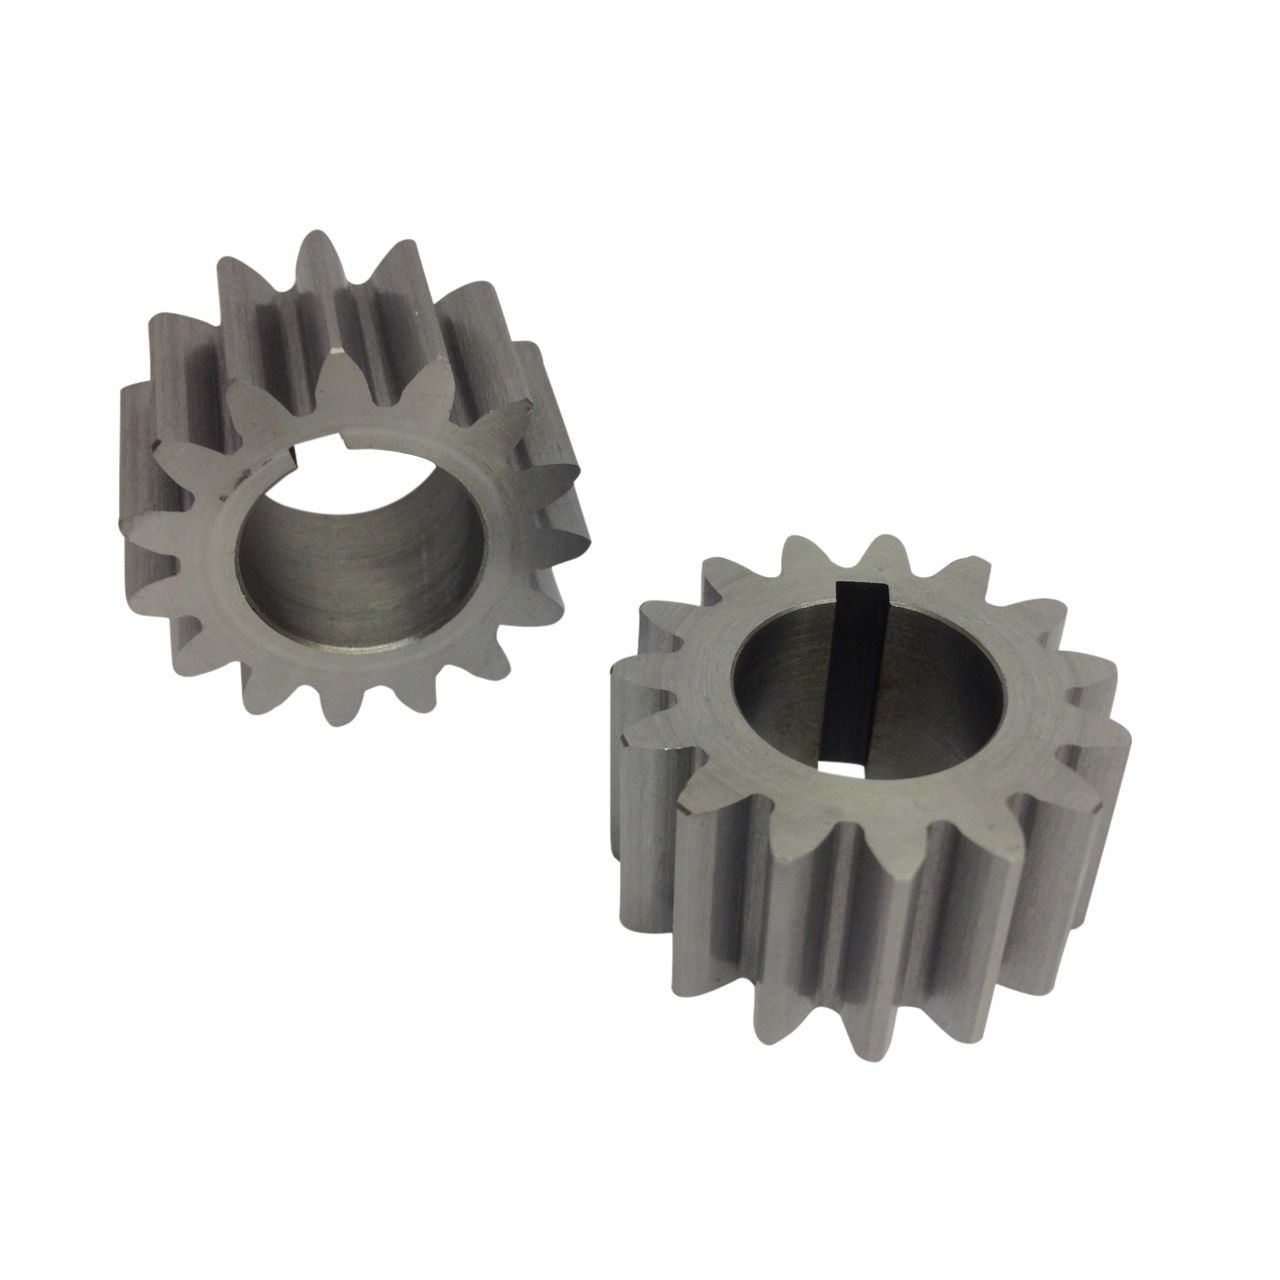 Hobart Mixer Replacement Gear 5/8" 15 Teeth Fits A120 A200 Also known as 124748 